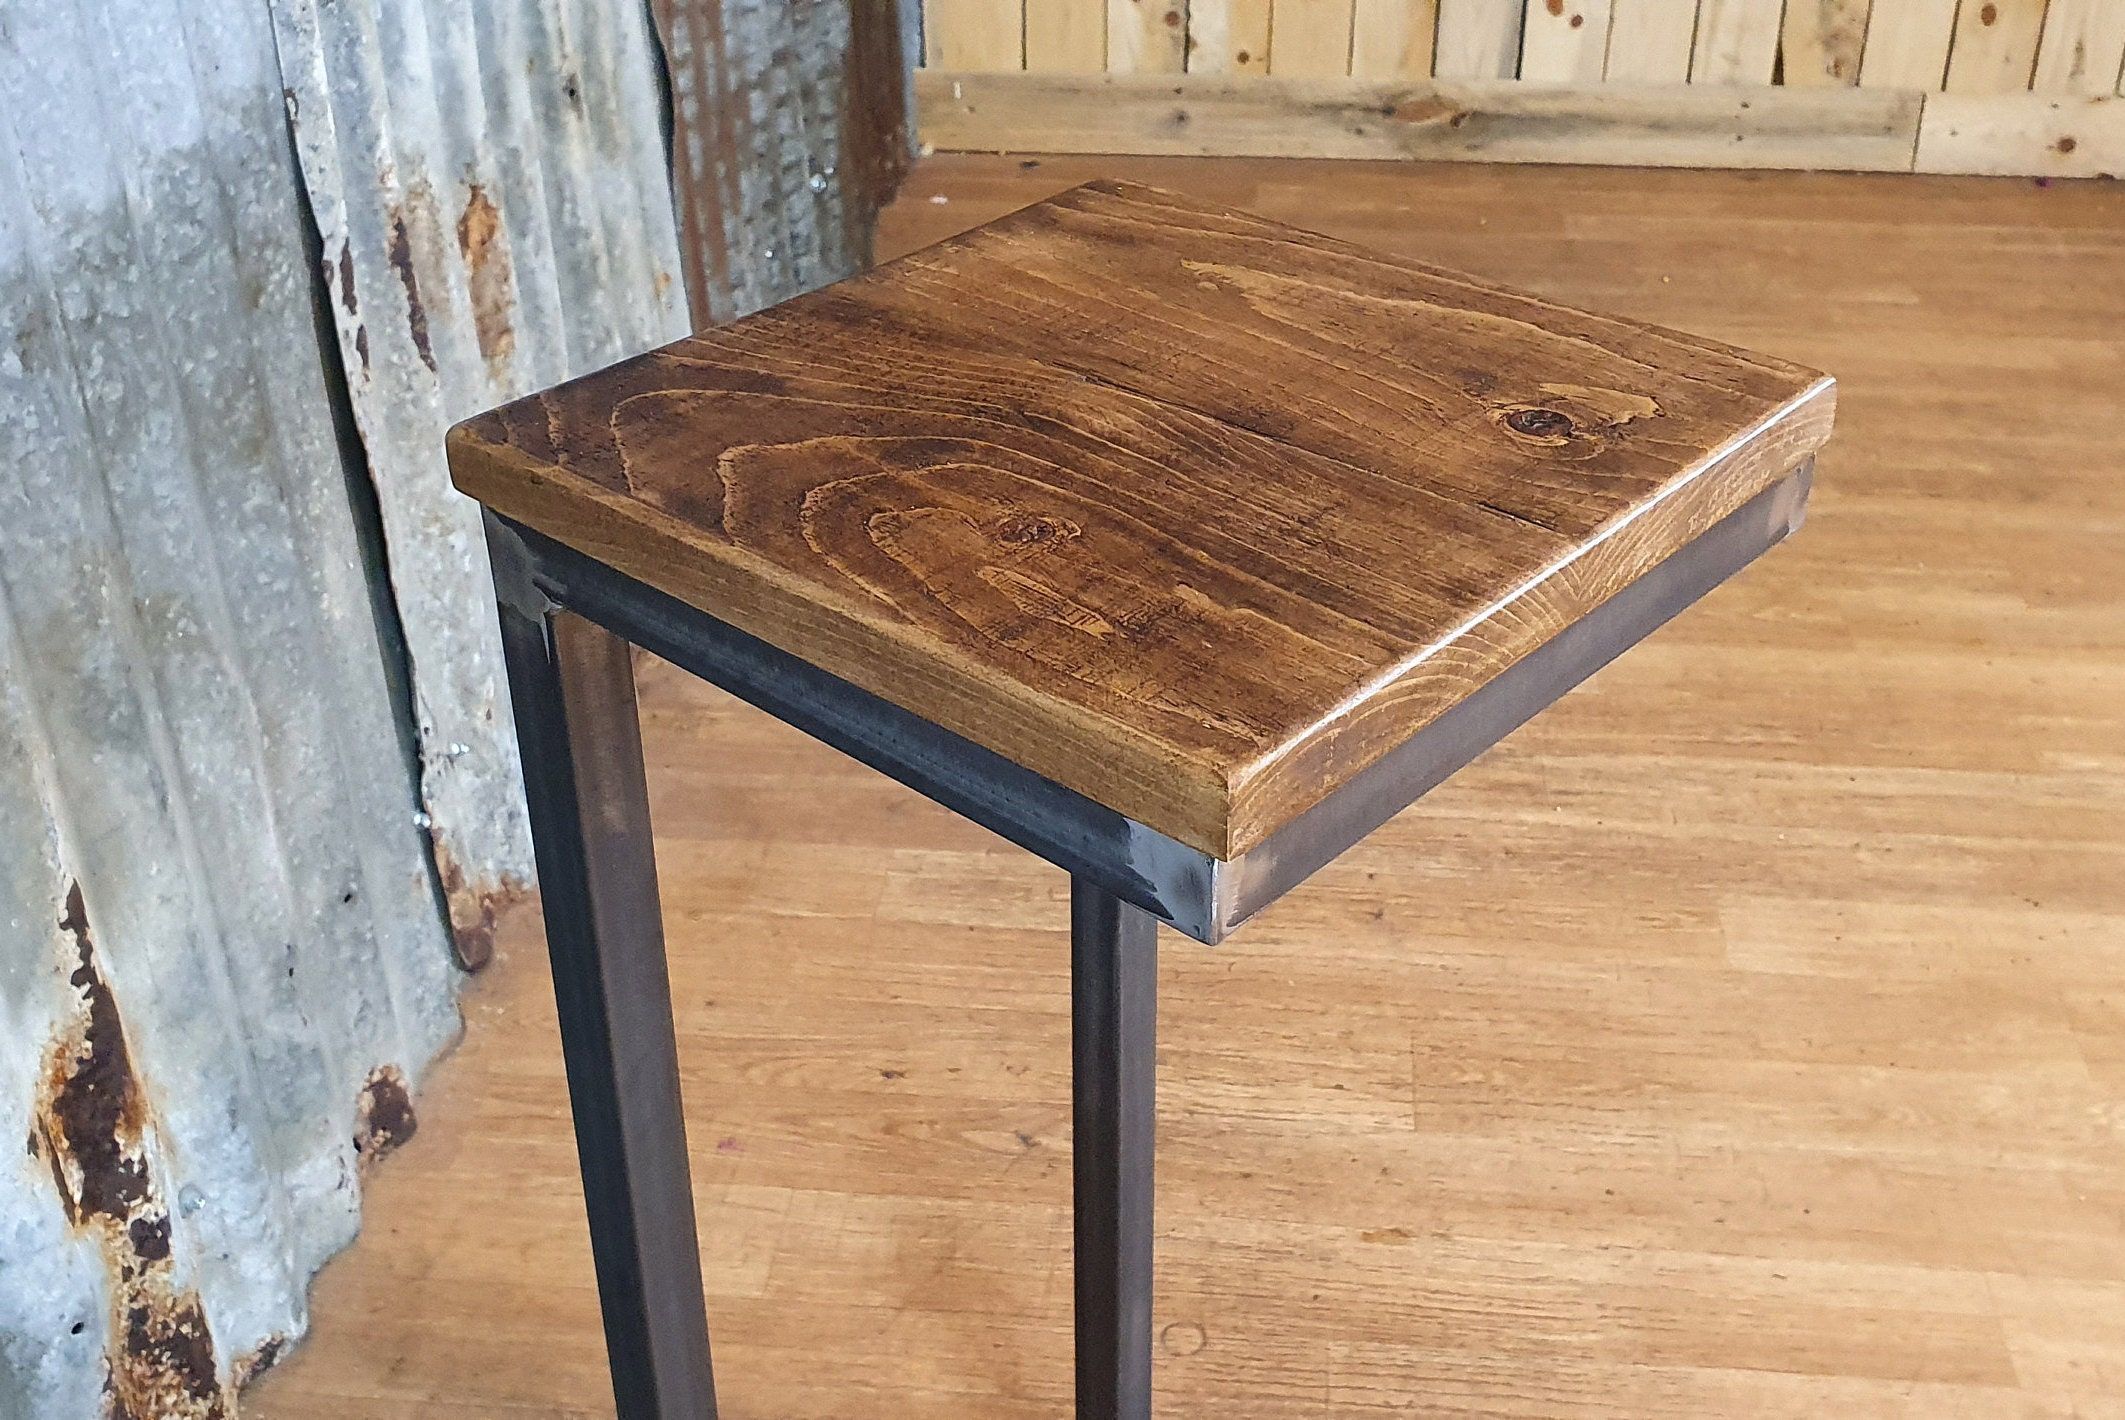 Rustic Industrial Sofa Side Table, Wooden C Shaped Lap Table, Bespoke Throughout Rustic Walnut Wood Console Tables (View 4 of 20)